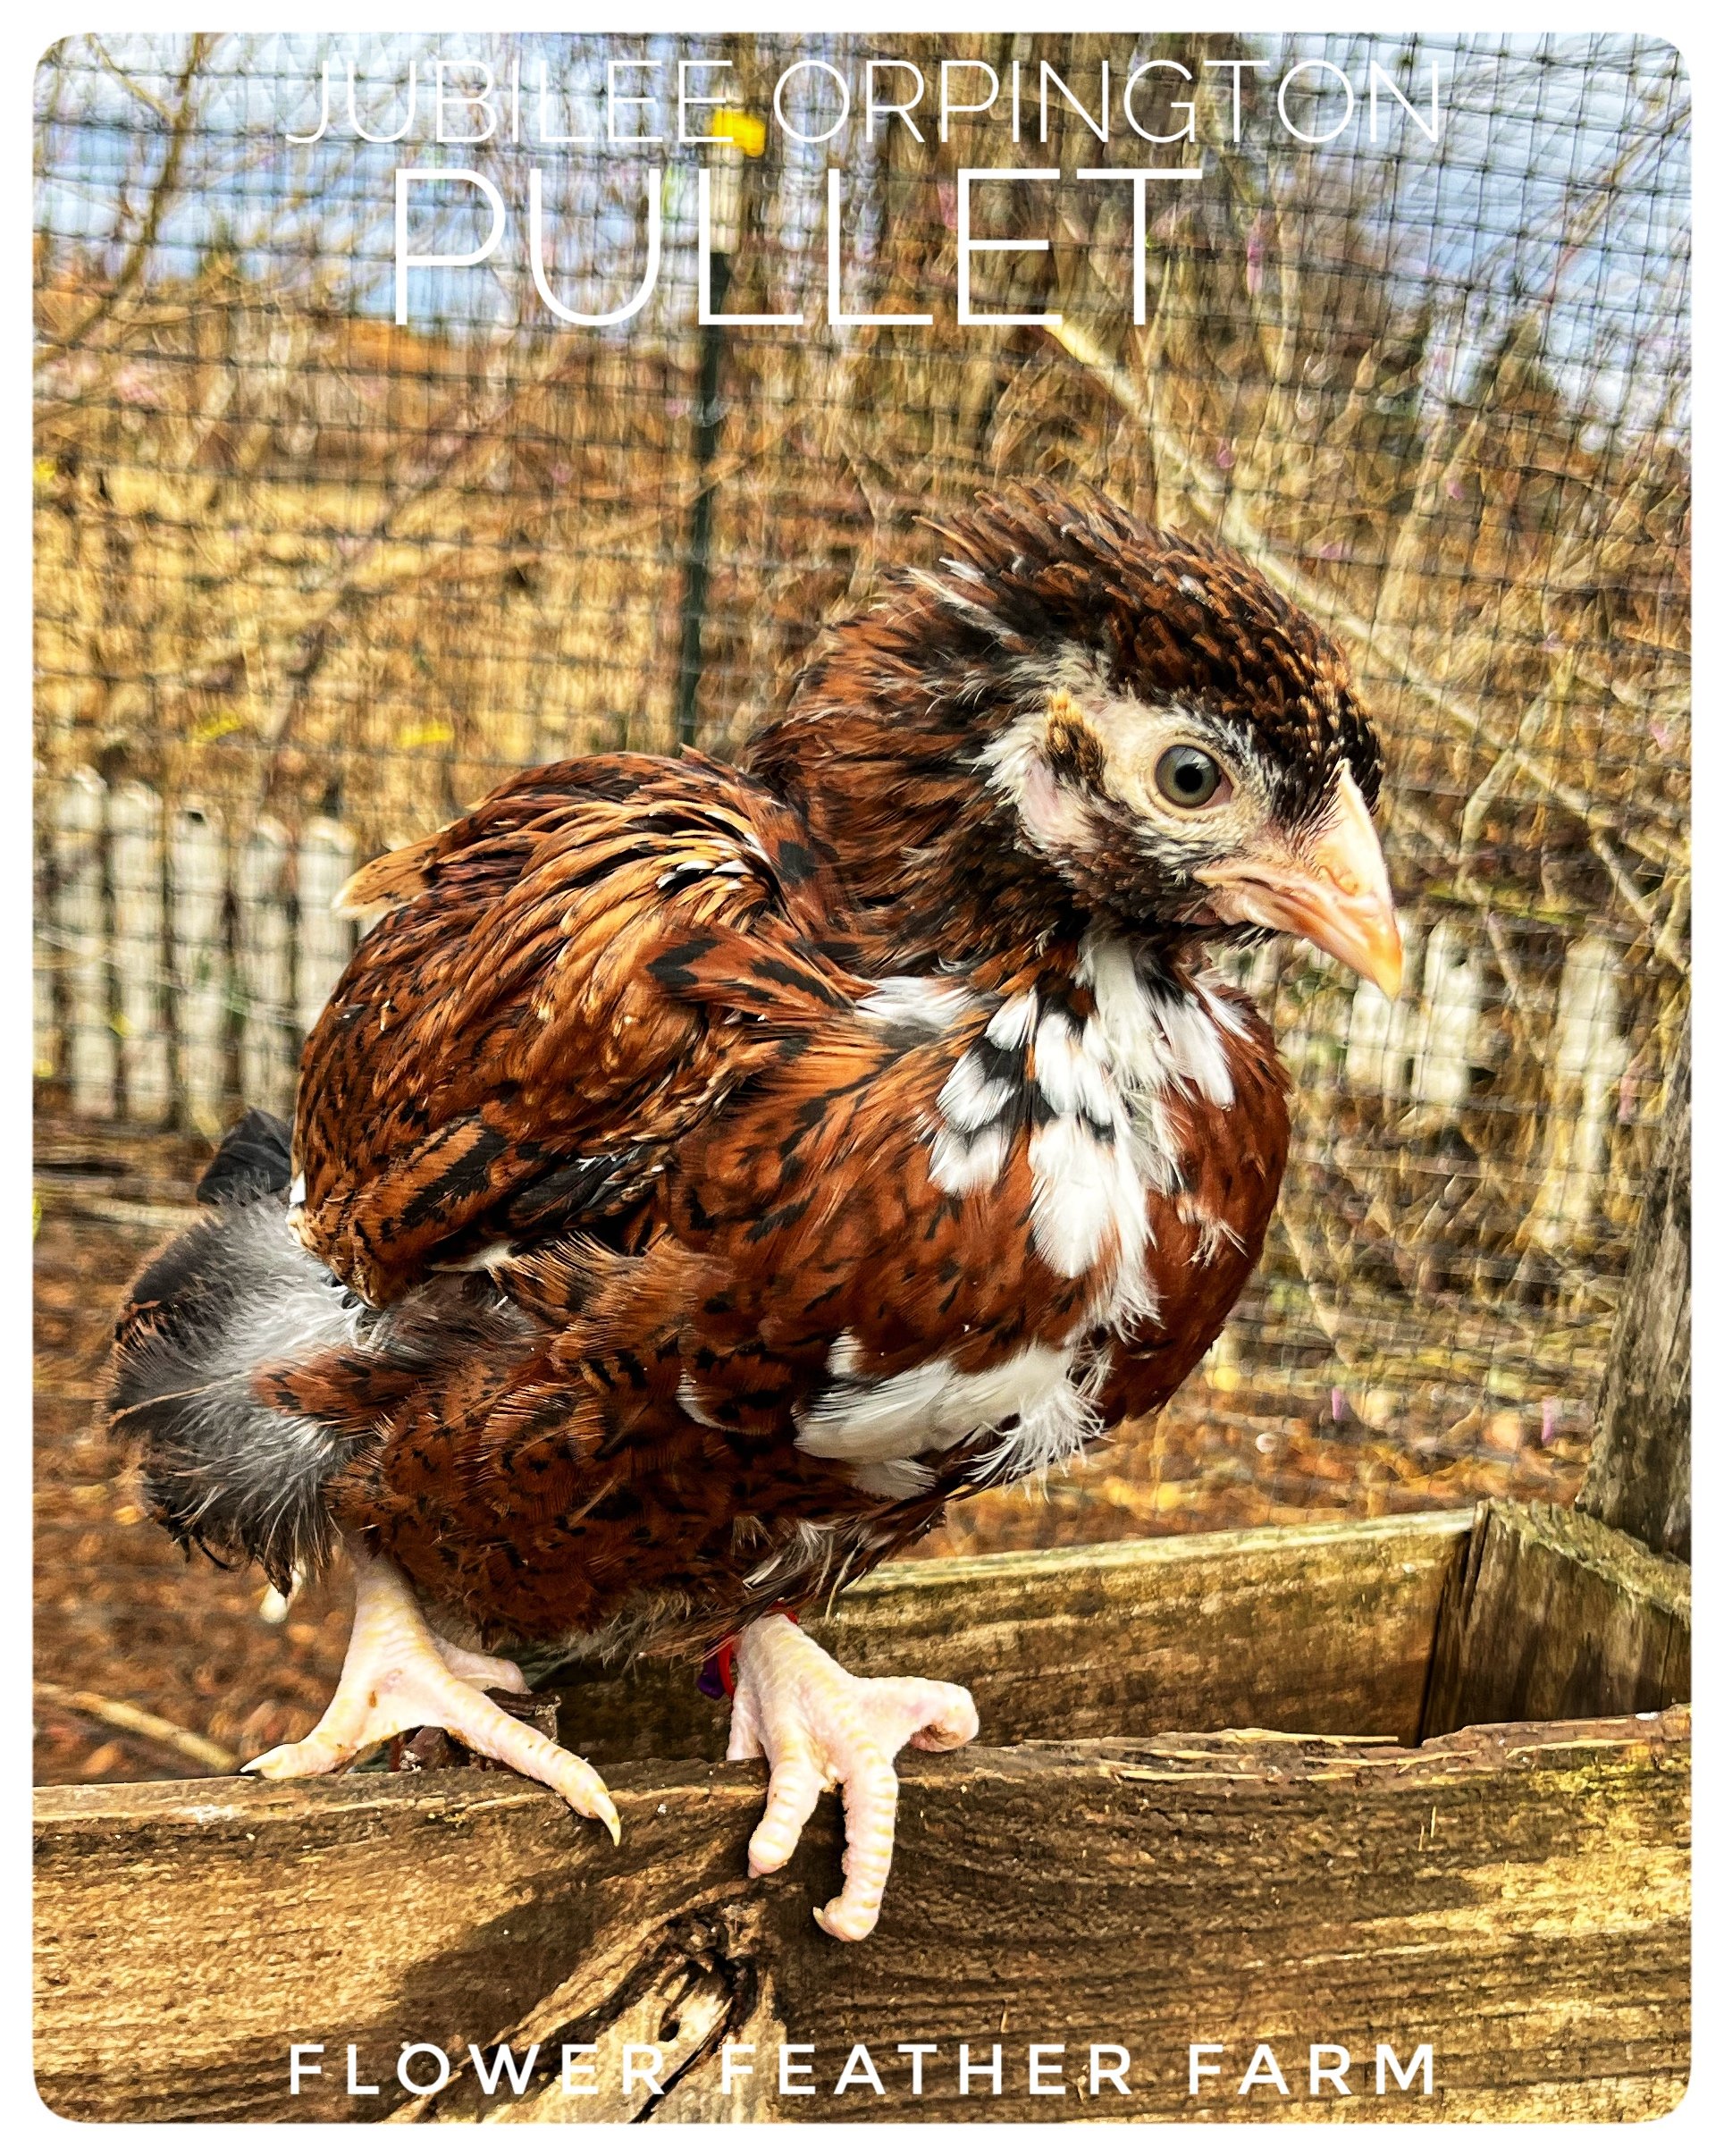 Jubilee Orpington Pullet at Flower Feather Farm, chicks &amp; dahlias, a chick hatchery near me